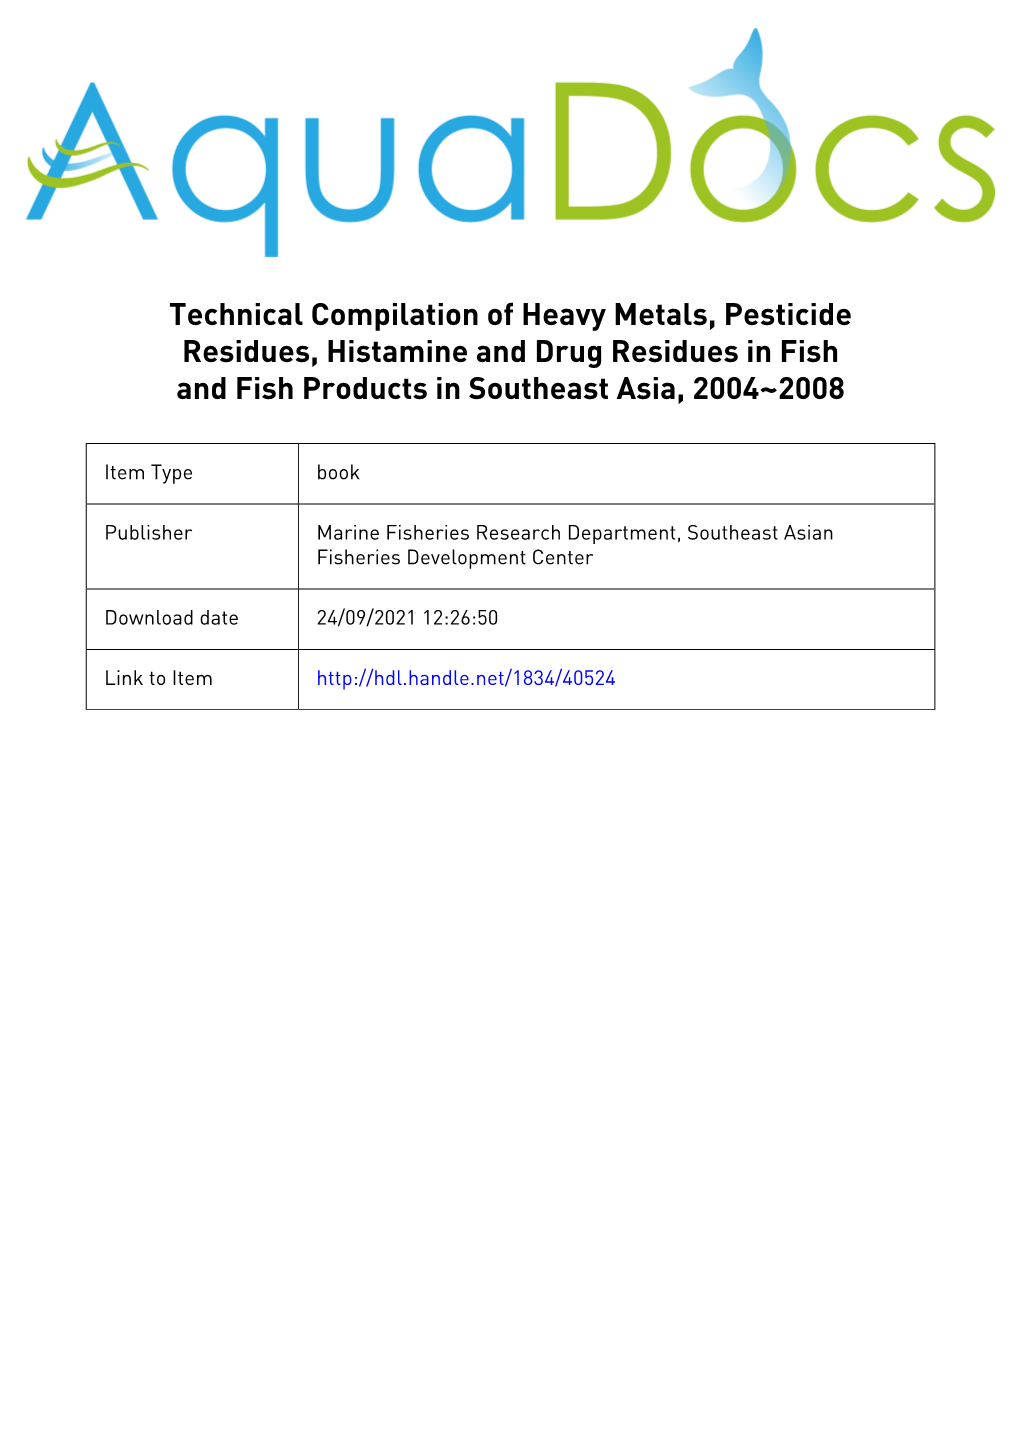 Technical Compilation of Heavy Metals, Pesticide Residues, Histamine and Drug Residues in Fish and Fish Products in Southeast Asia, 2004~2008